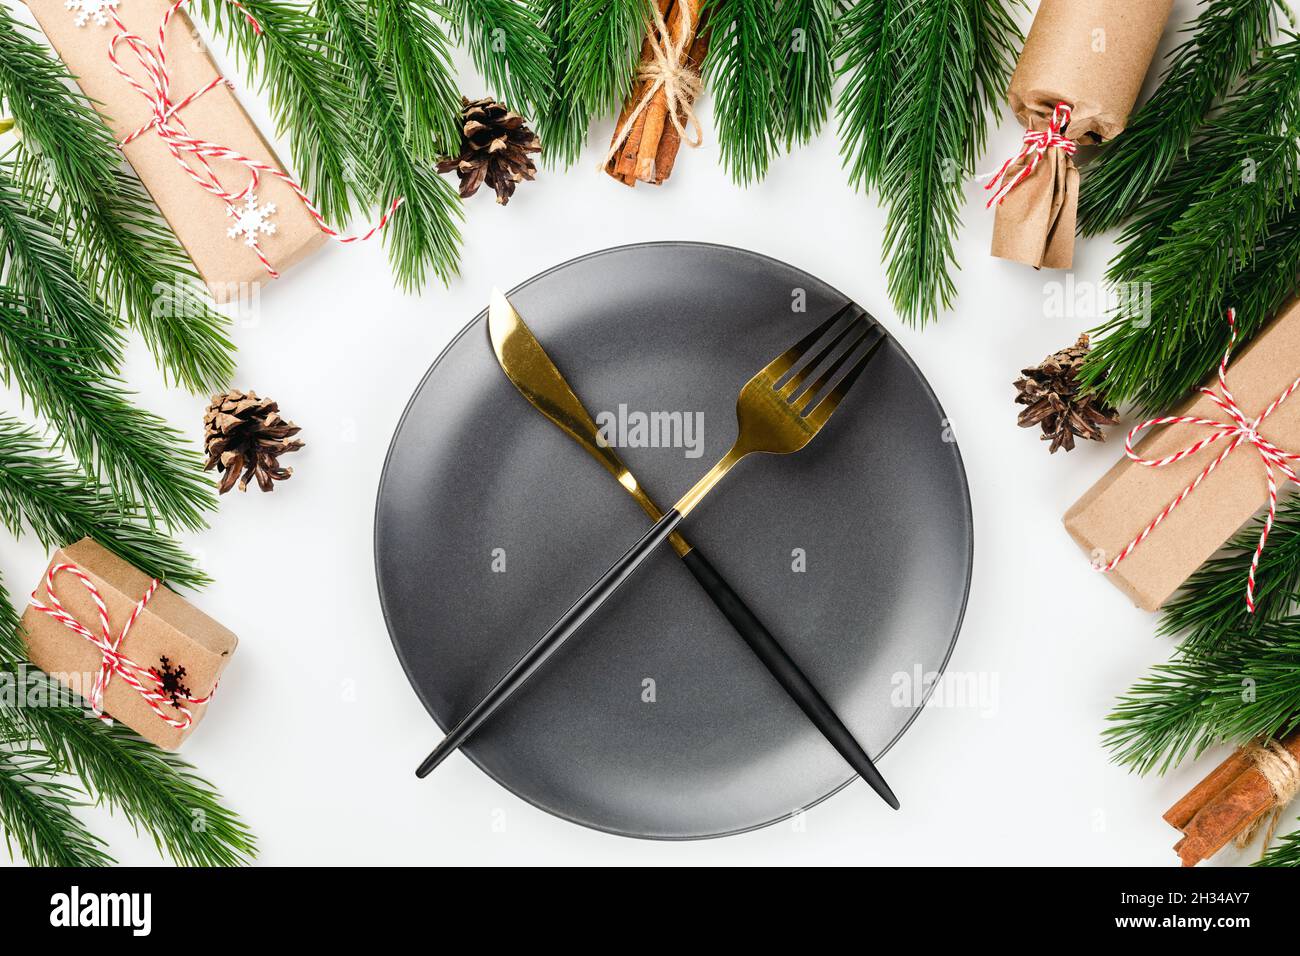 golden knife and fork crossed on black plate on Christmas dinner table with frame of fir branches, with cones and gifts Stock Photo